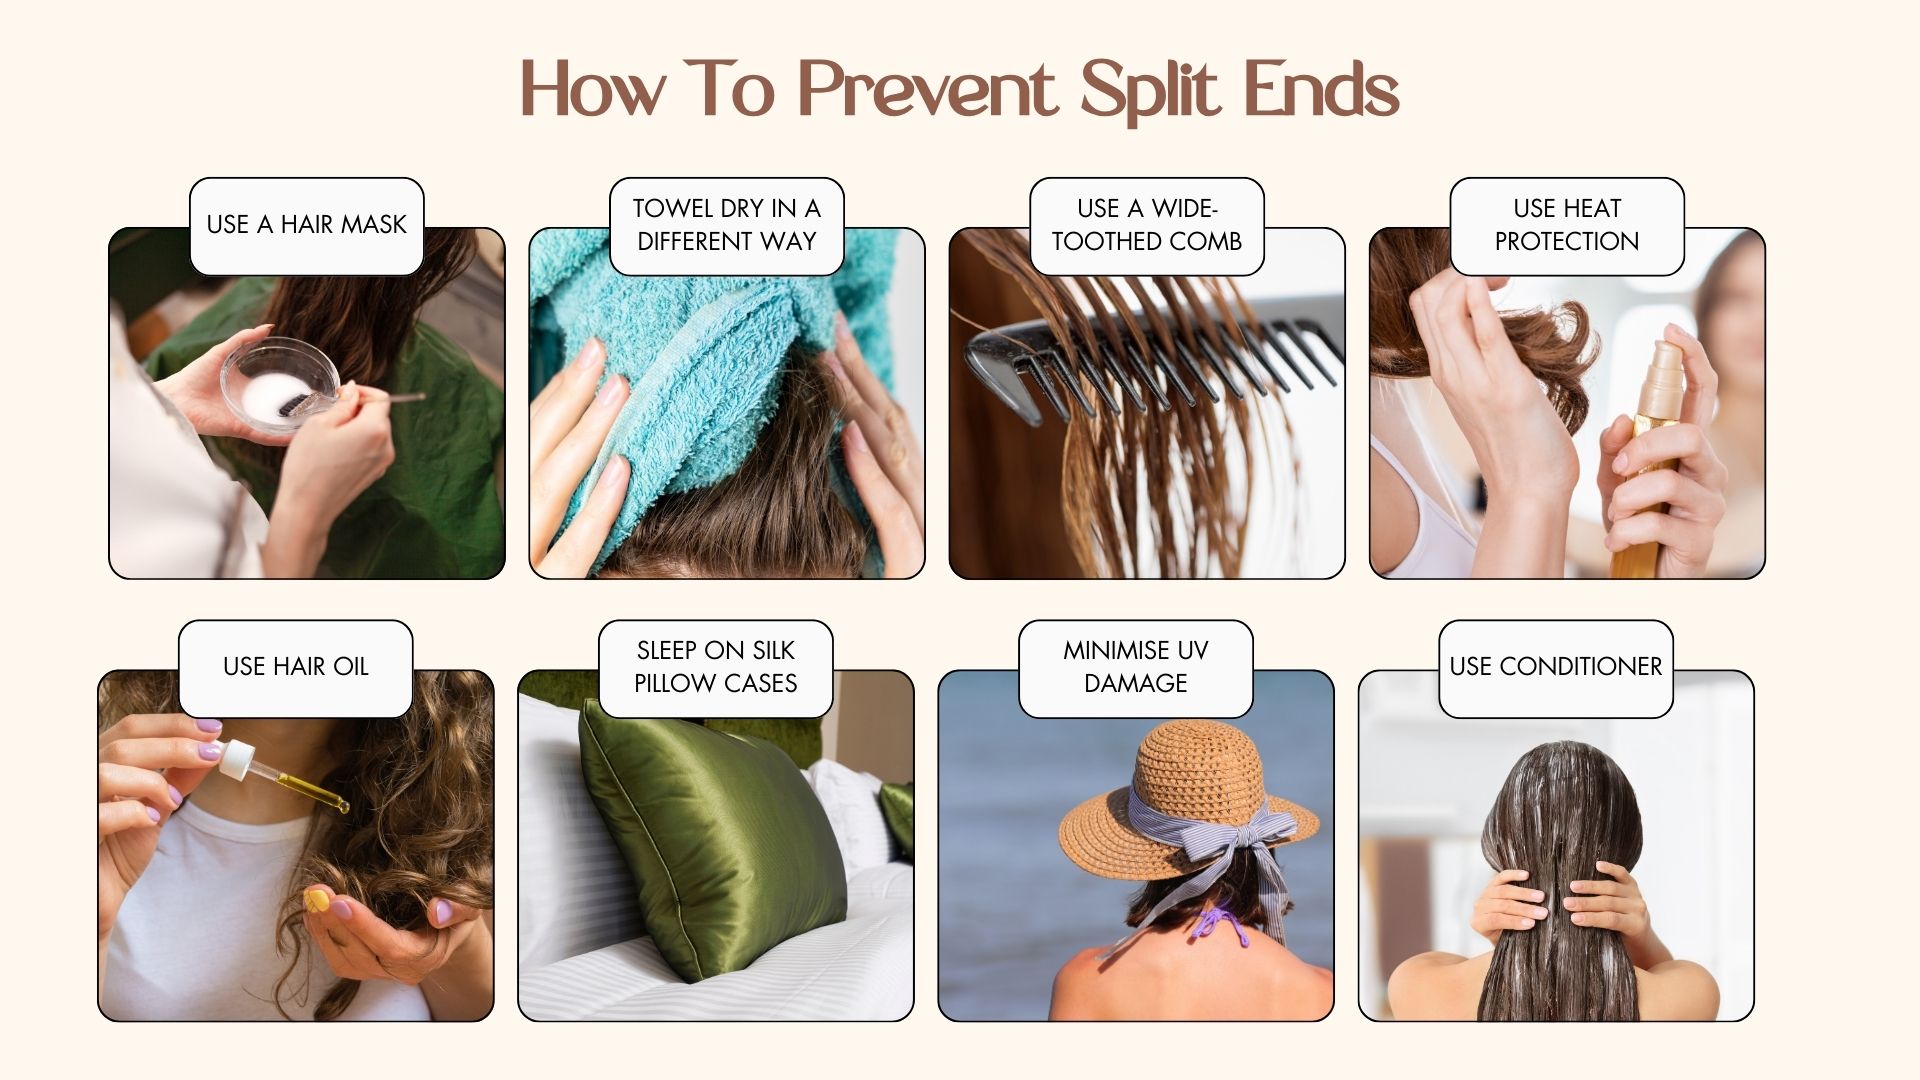 How to Prevent Split Ends: 6 Must-Follow Tips